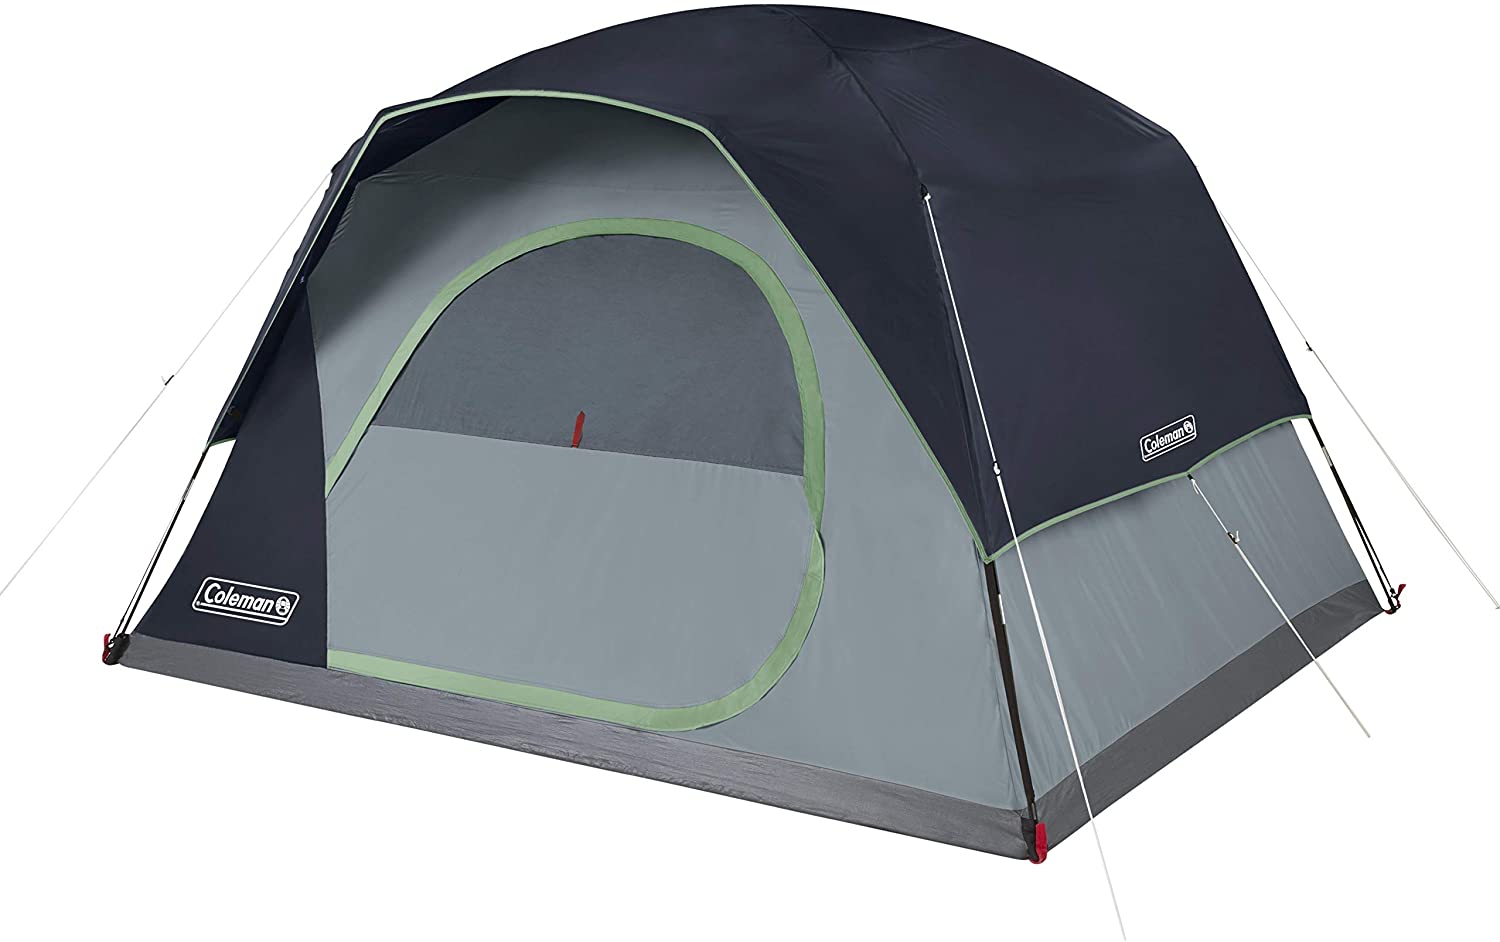 are coleman tents good quality